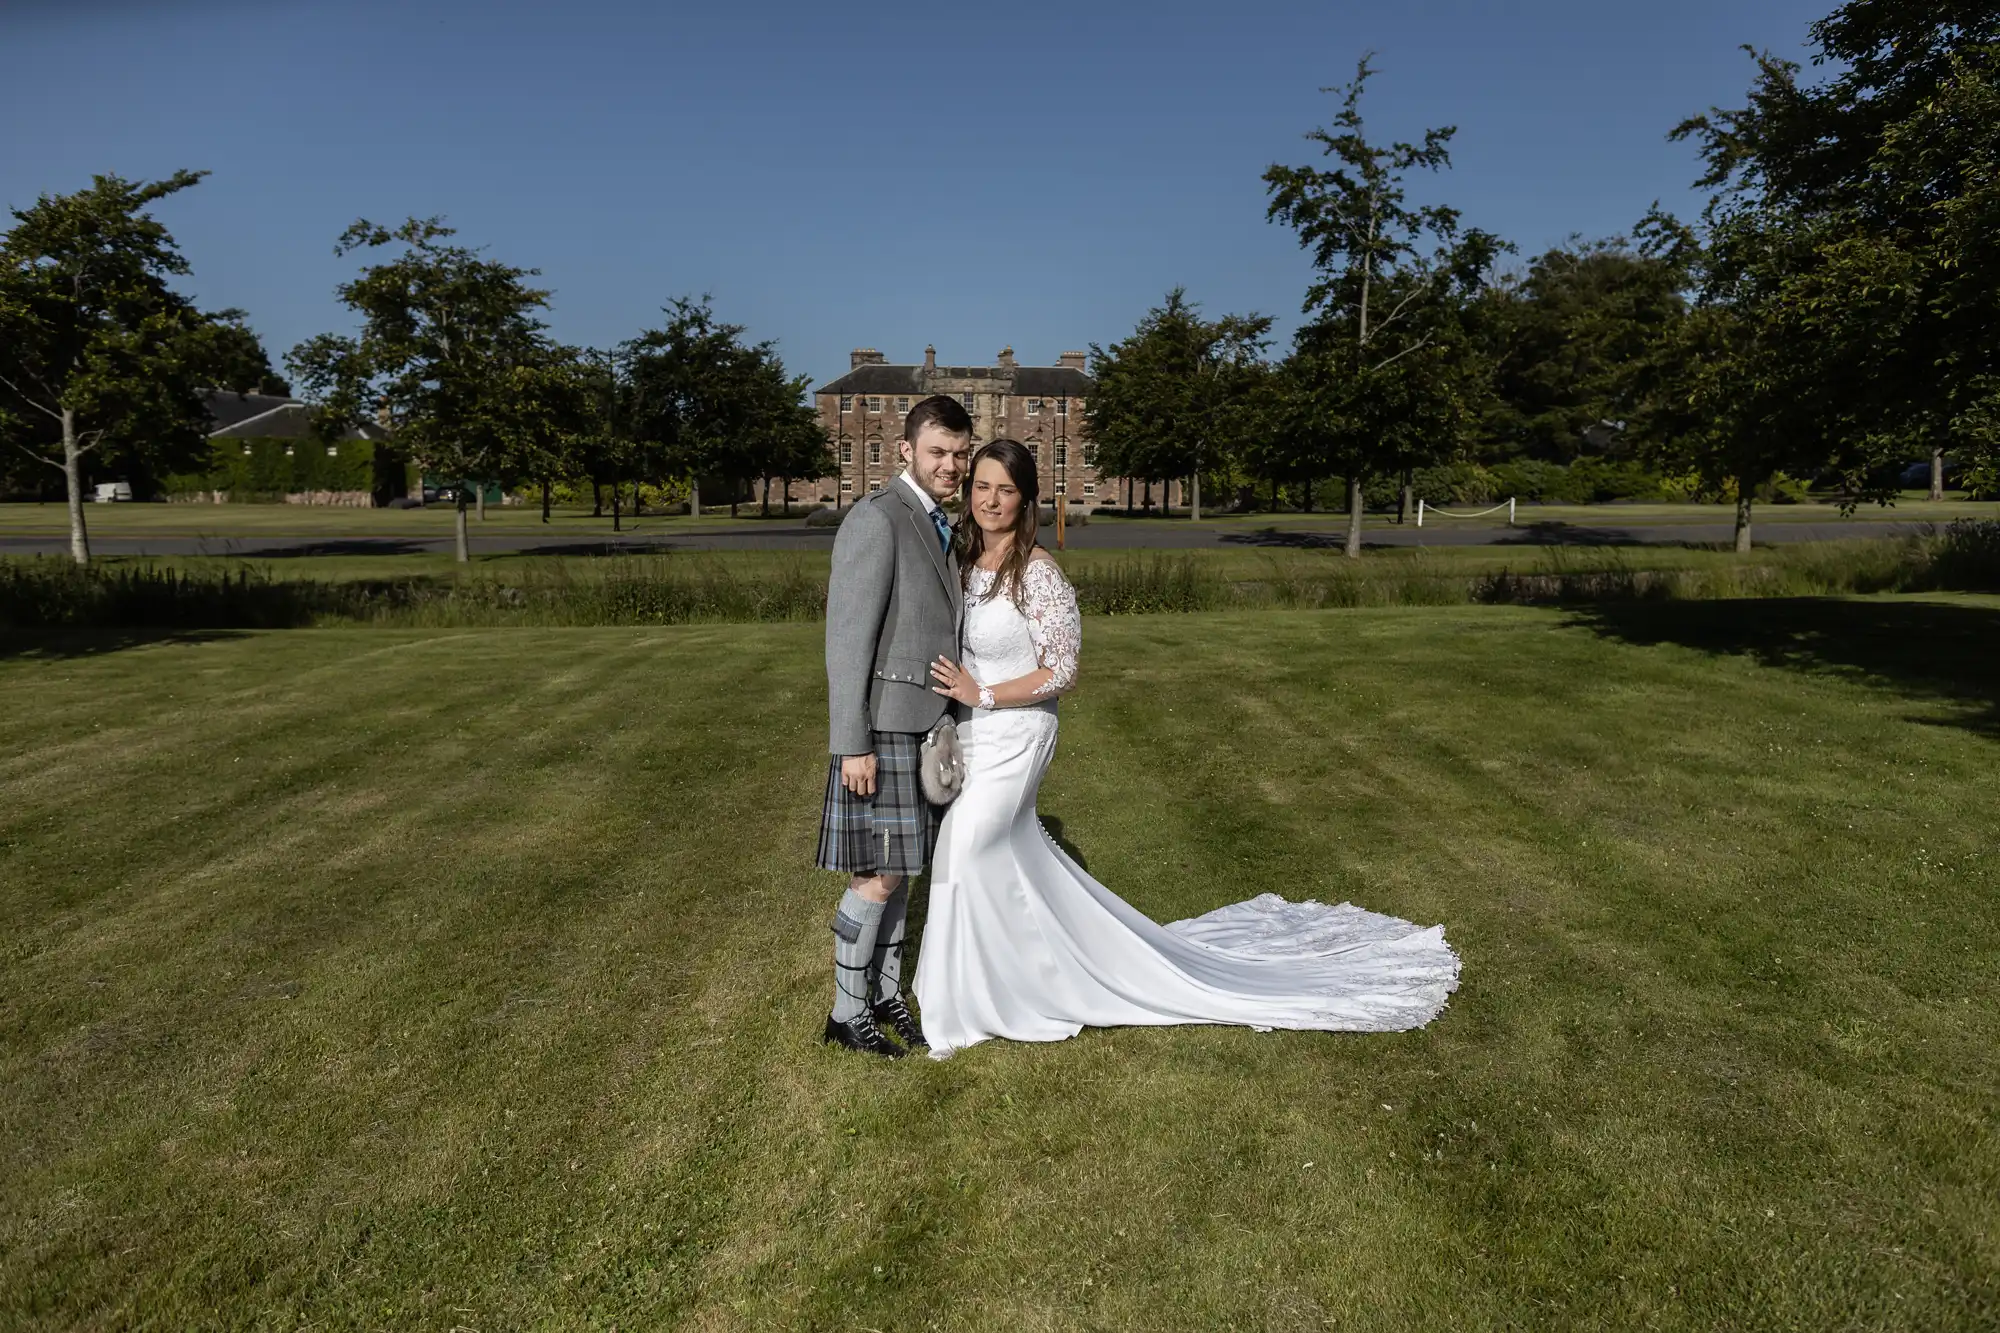 A bride and groom standing on a grassy lawn with a large manor house in the background on a sunny day.